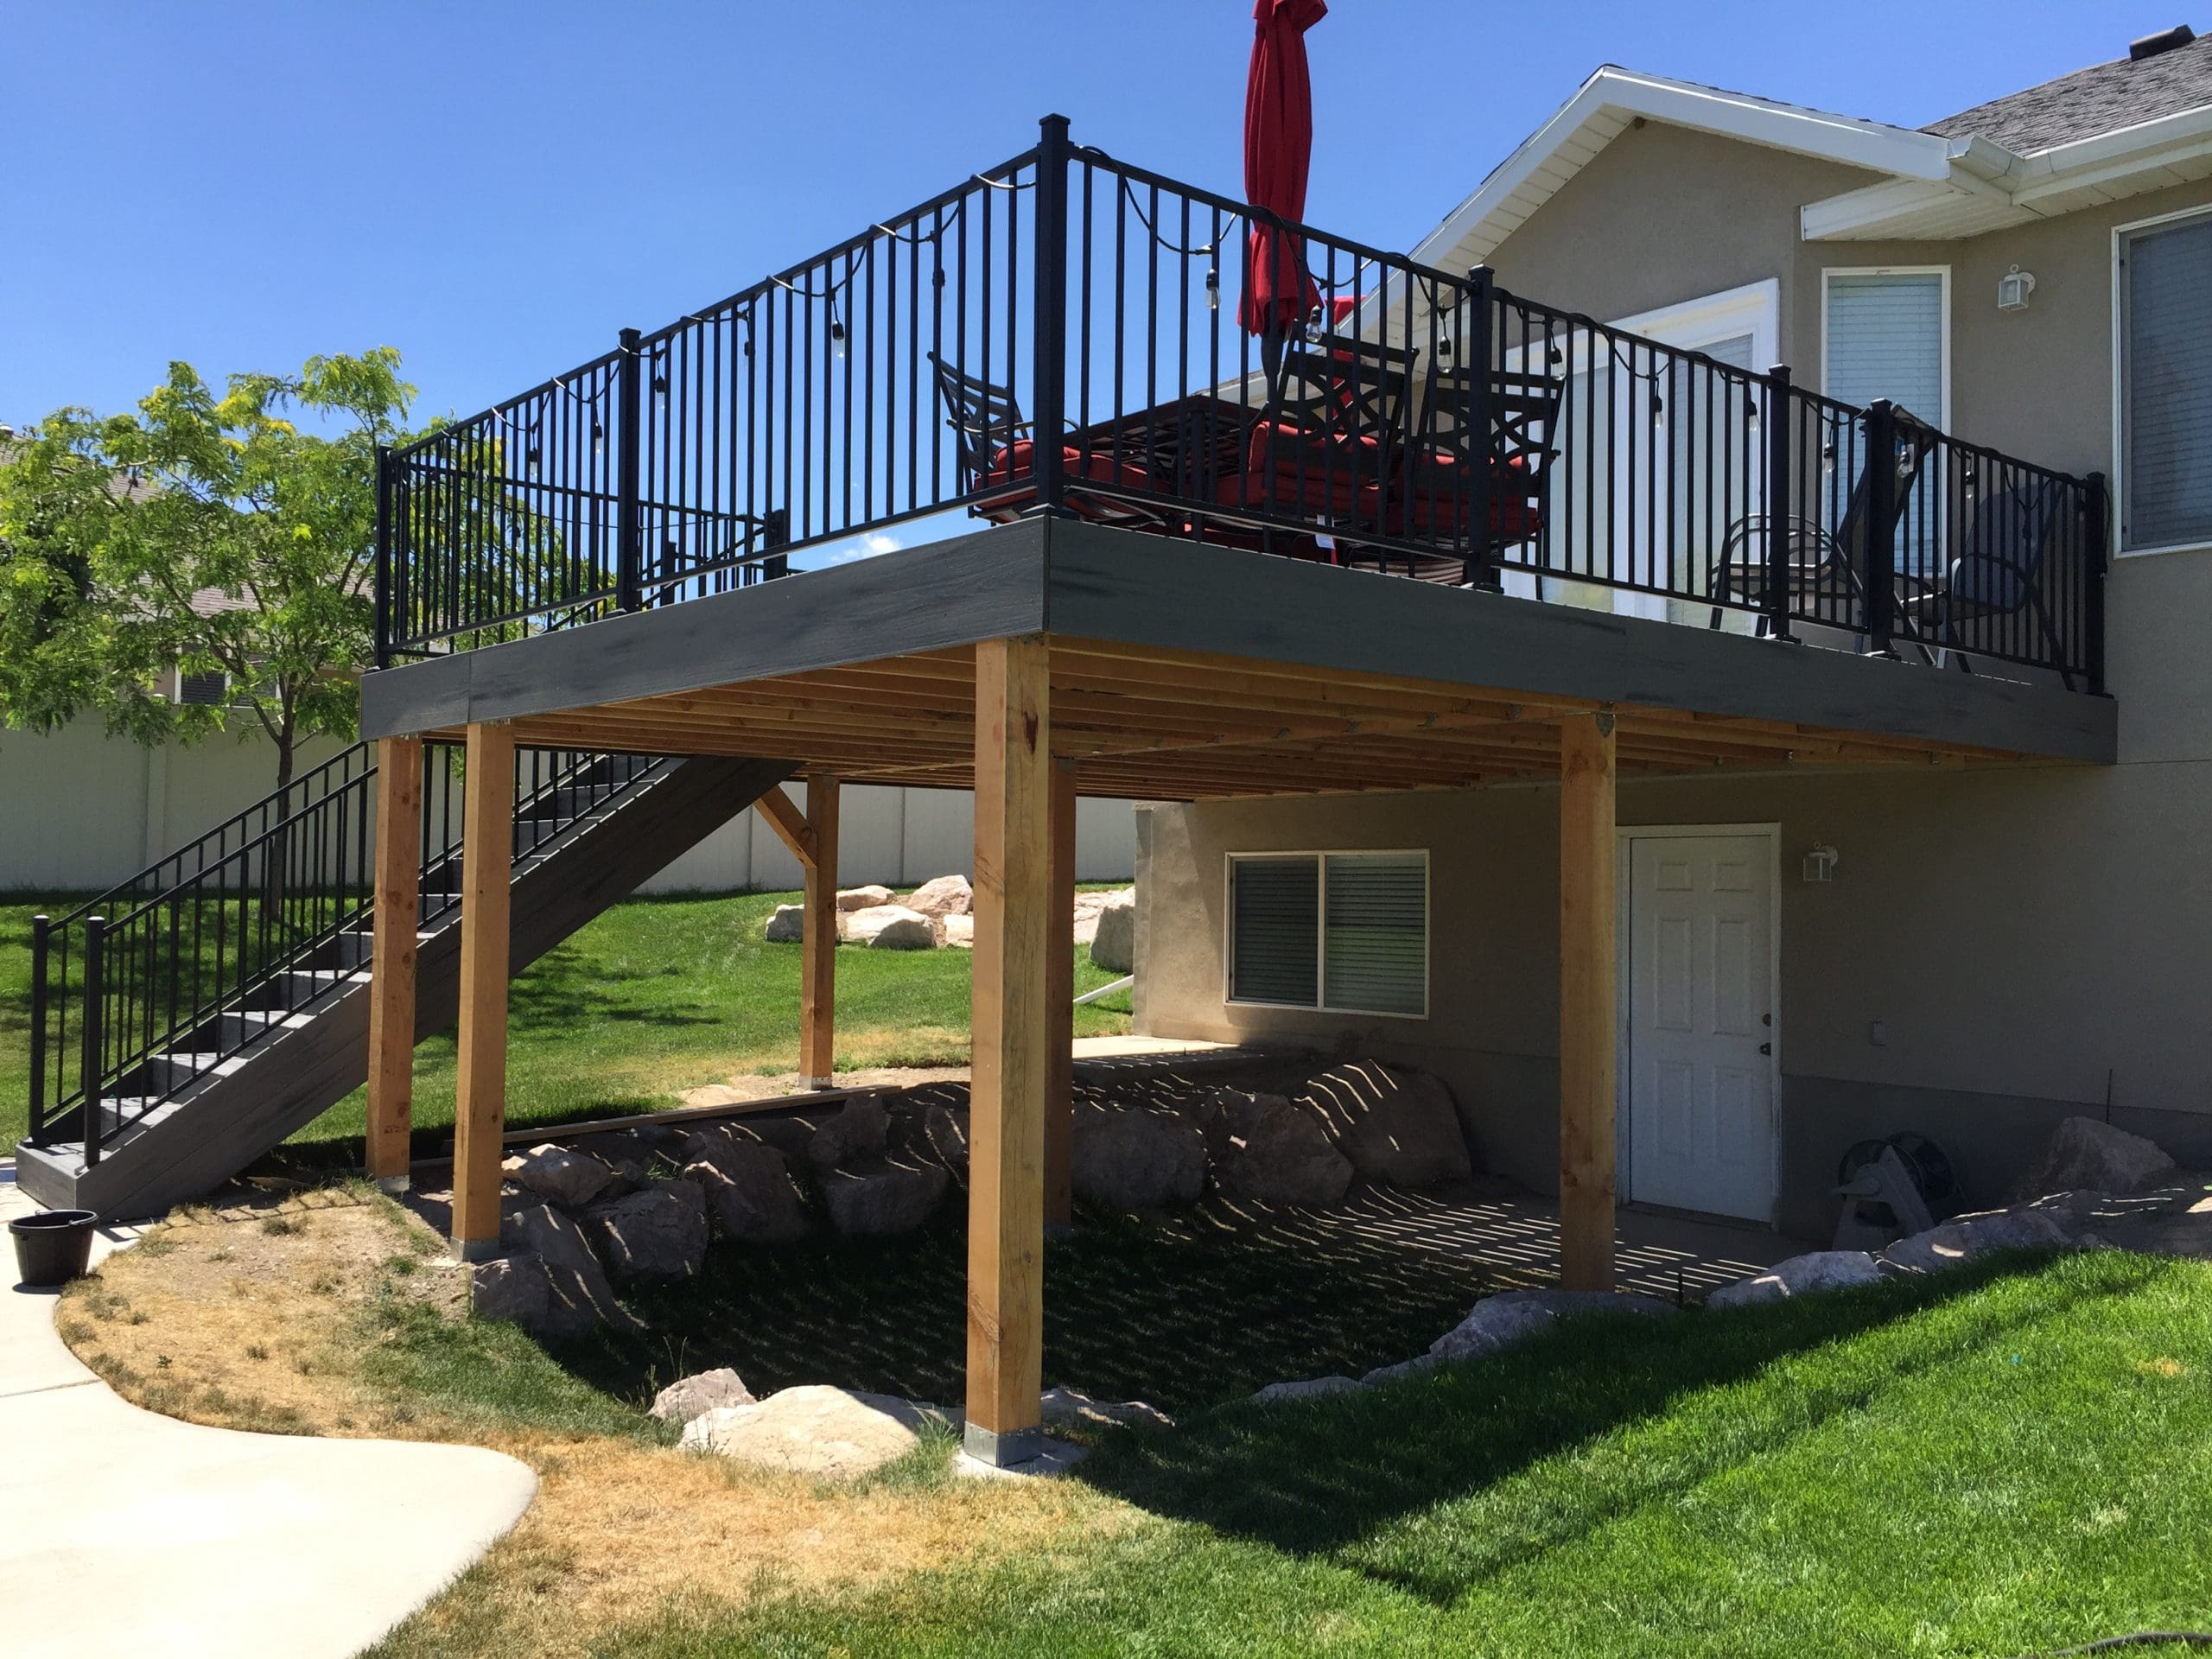 Blackrock Decks is one of the best deck builders in Eagle Mountain, Utah. Contact us for a quote on custom decks, pergolas, and patio covers.